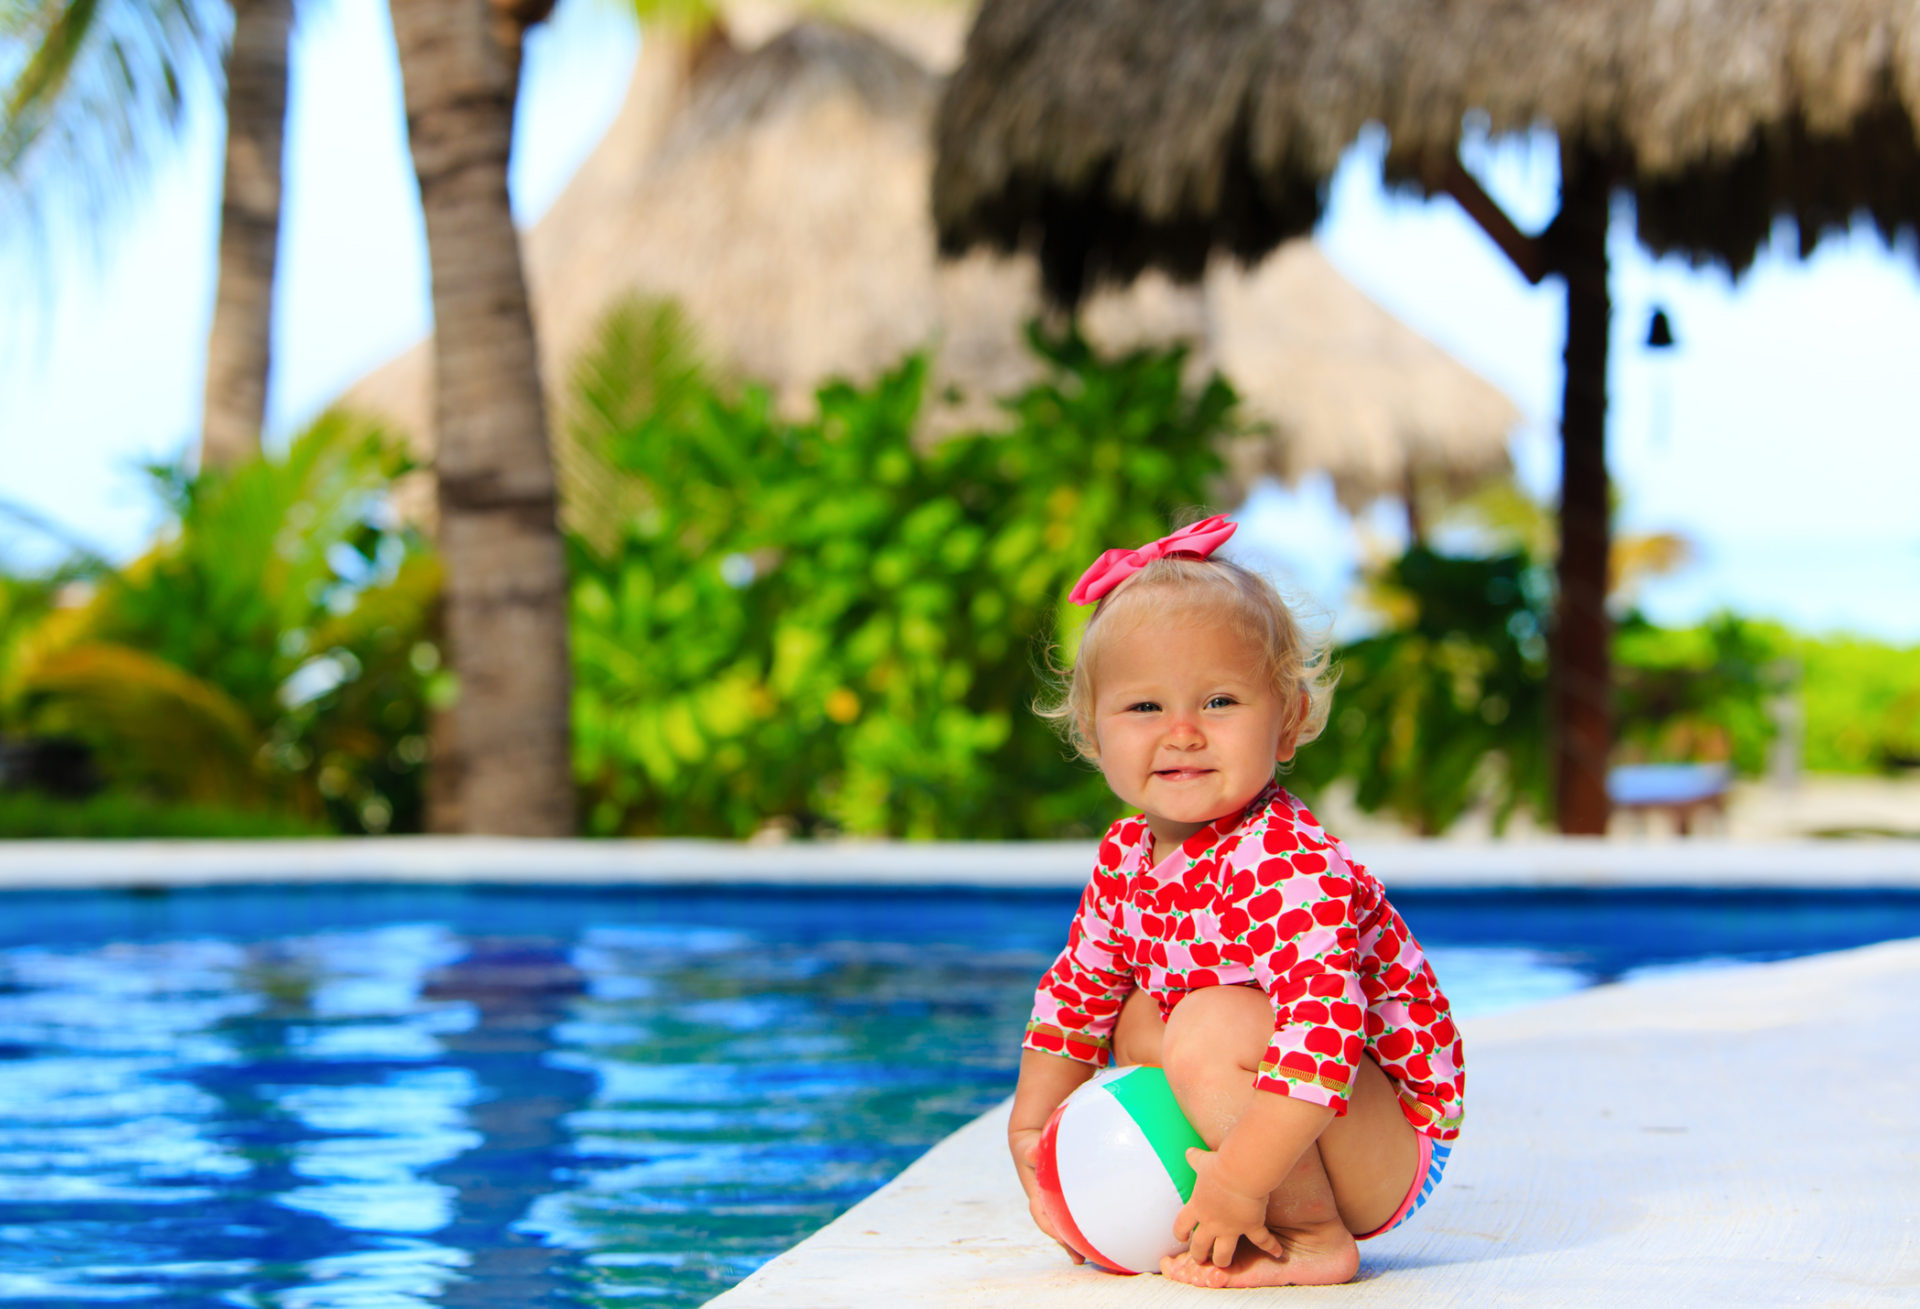 How to kid-proof your swimming pool